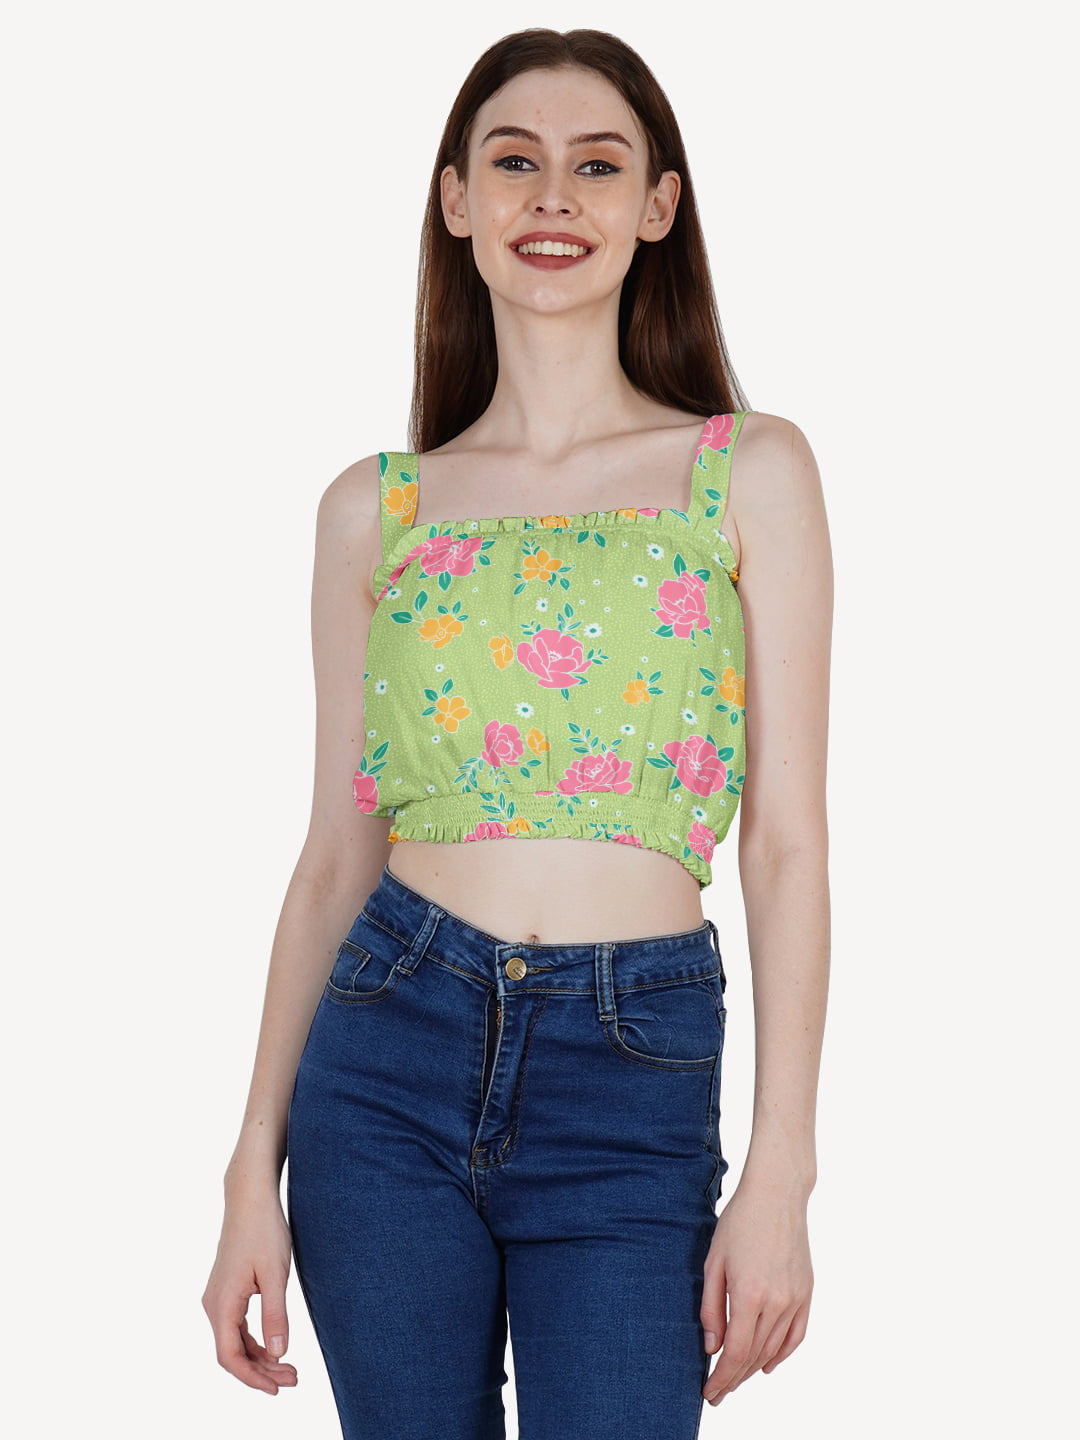 DressBerry Women's Printed Poly Crepe Crop Top Casual Summer Thick